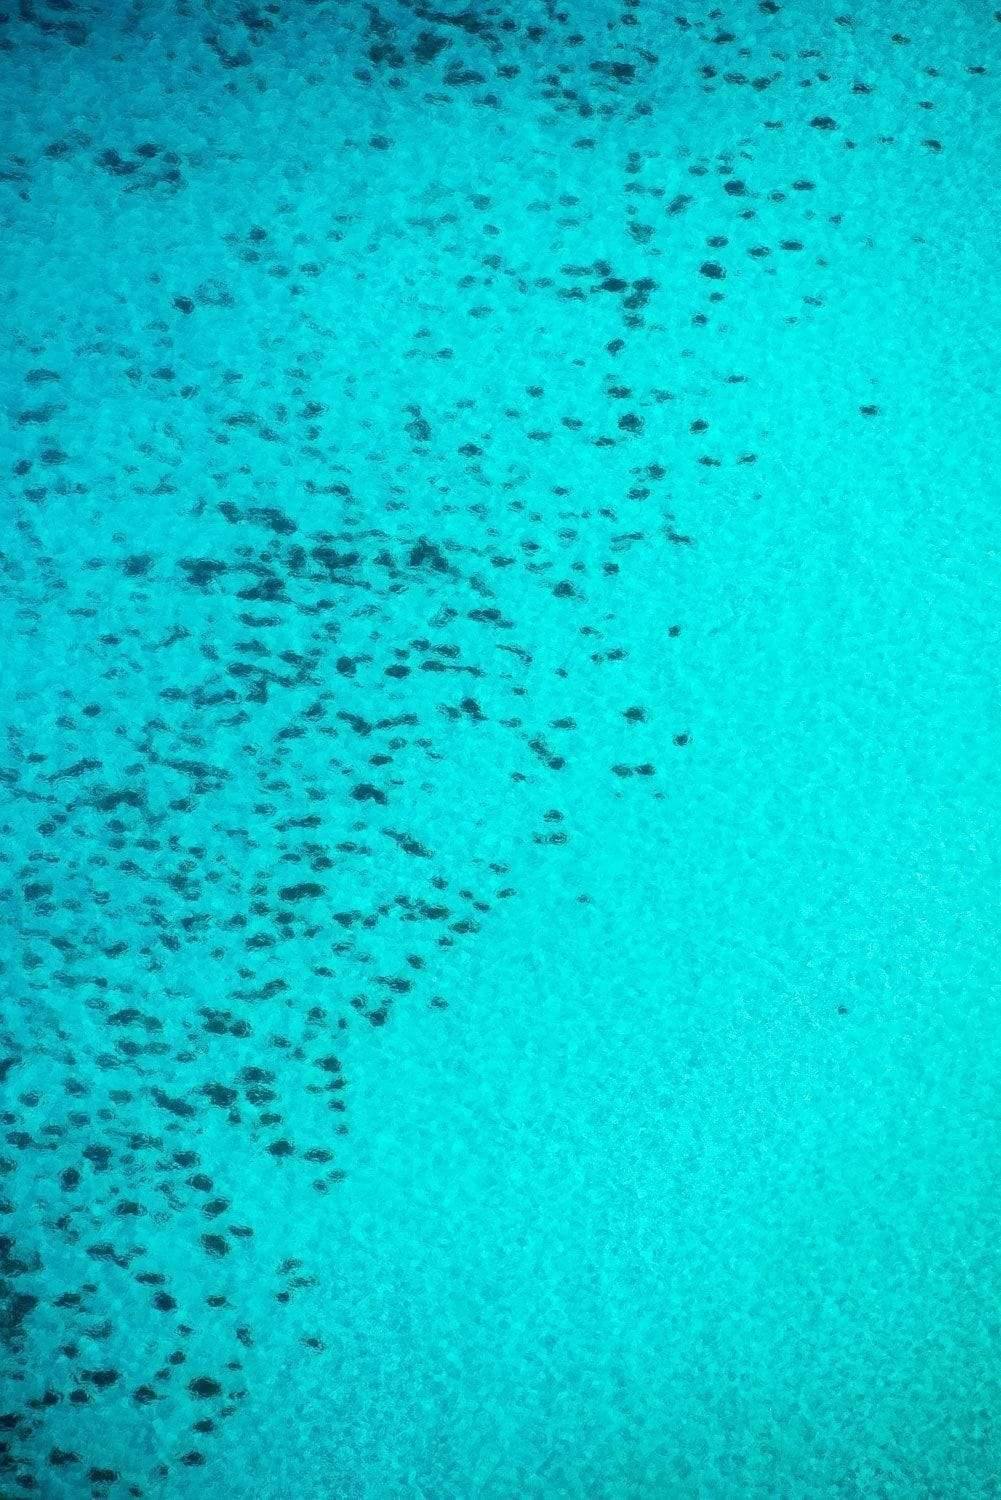 A portrait view of a large sky-blue oceanic surface with a group of countless blurred black spots, Eagle Bay